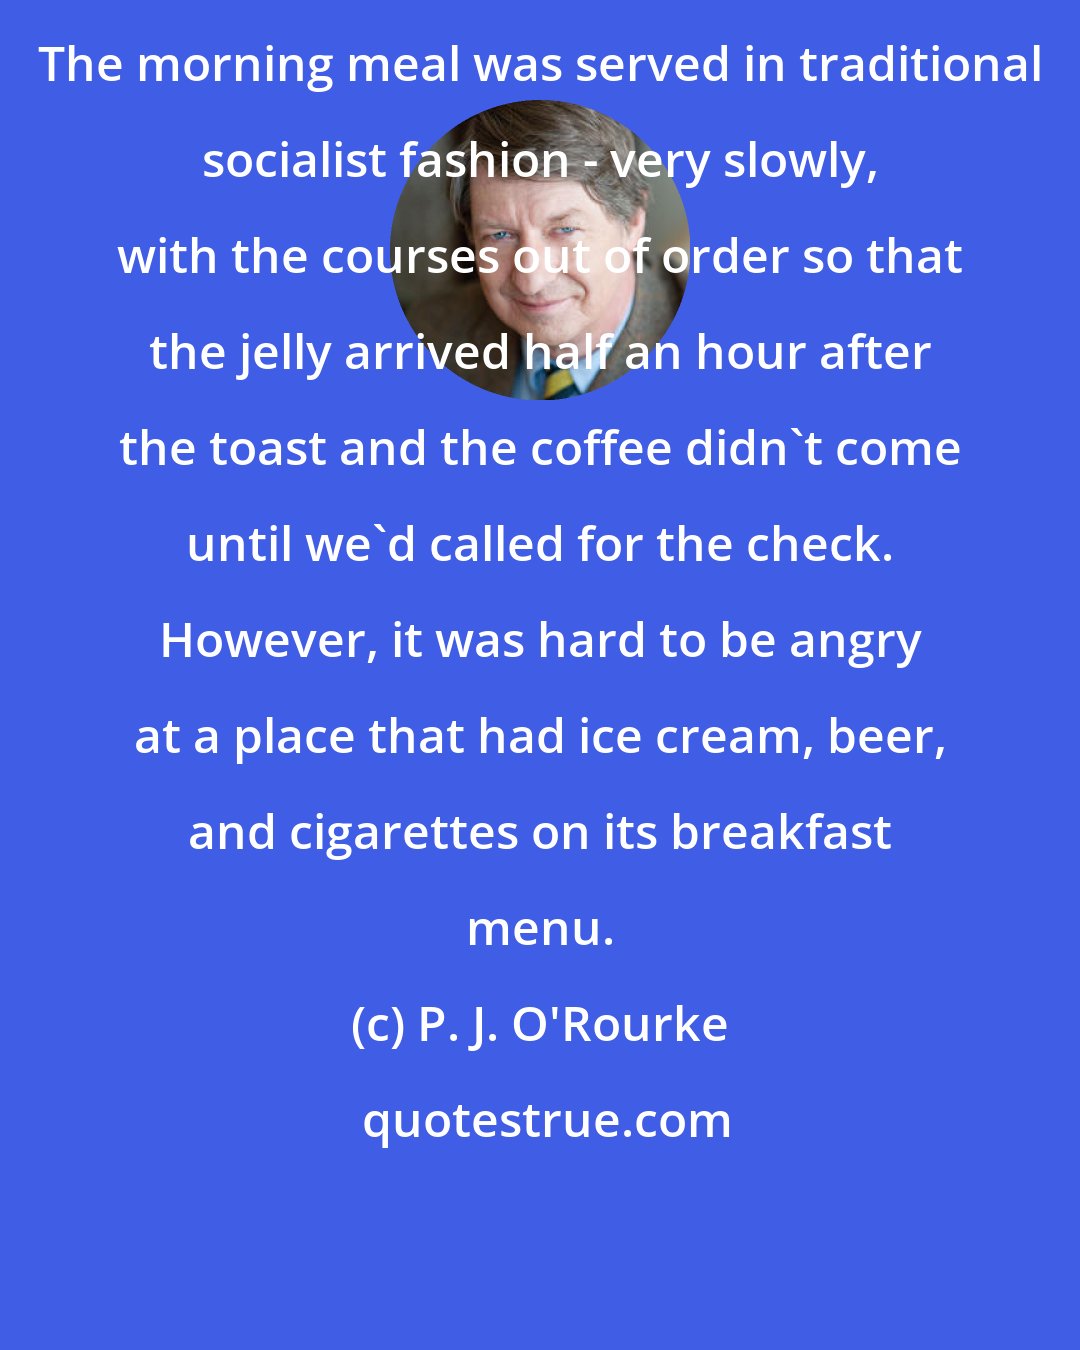 P. J. O'Rourke: The morning meal was served in traditional socialist fashion - very slowly, with the courses out of order so that the jelly arrived half an hour after the toast and the coffee didn't come until we'd called for the check. However, it was hard to be angry at a place that had ice cream, beer, and cigarettes on its breakfast menu.